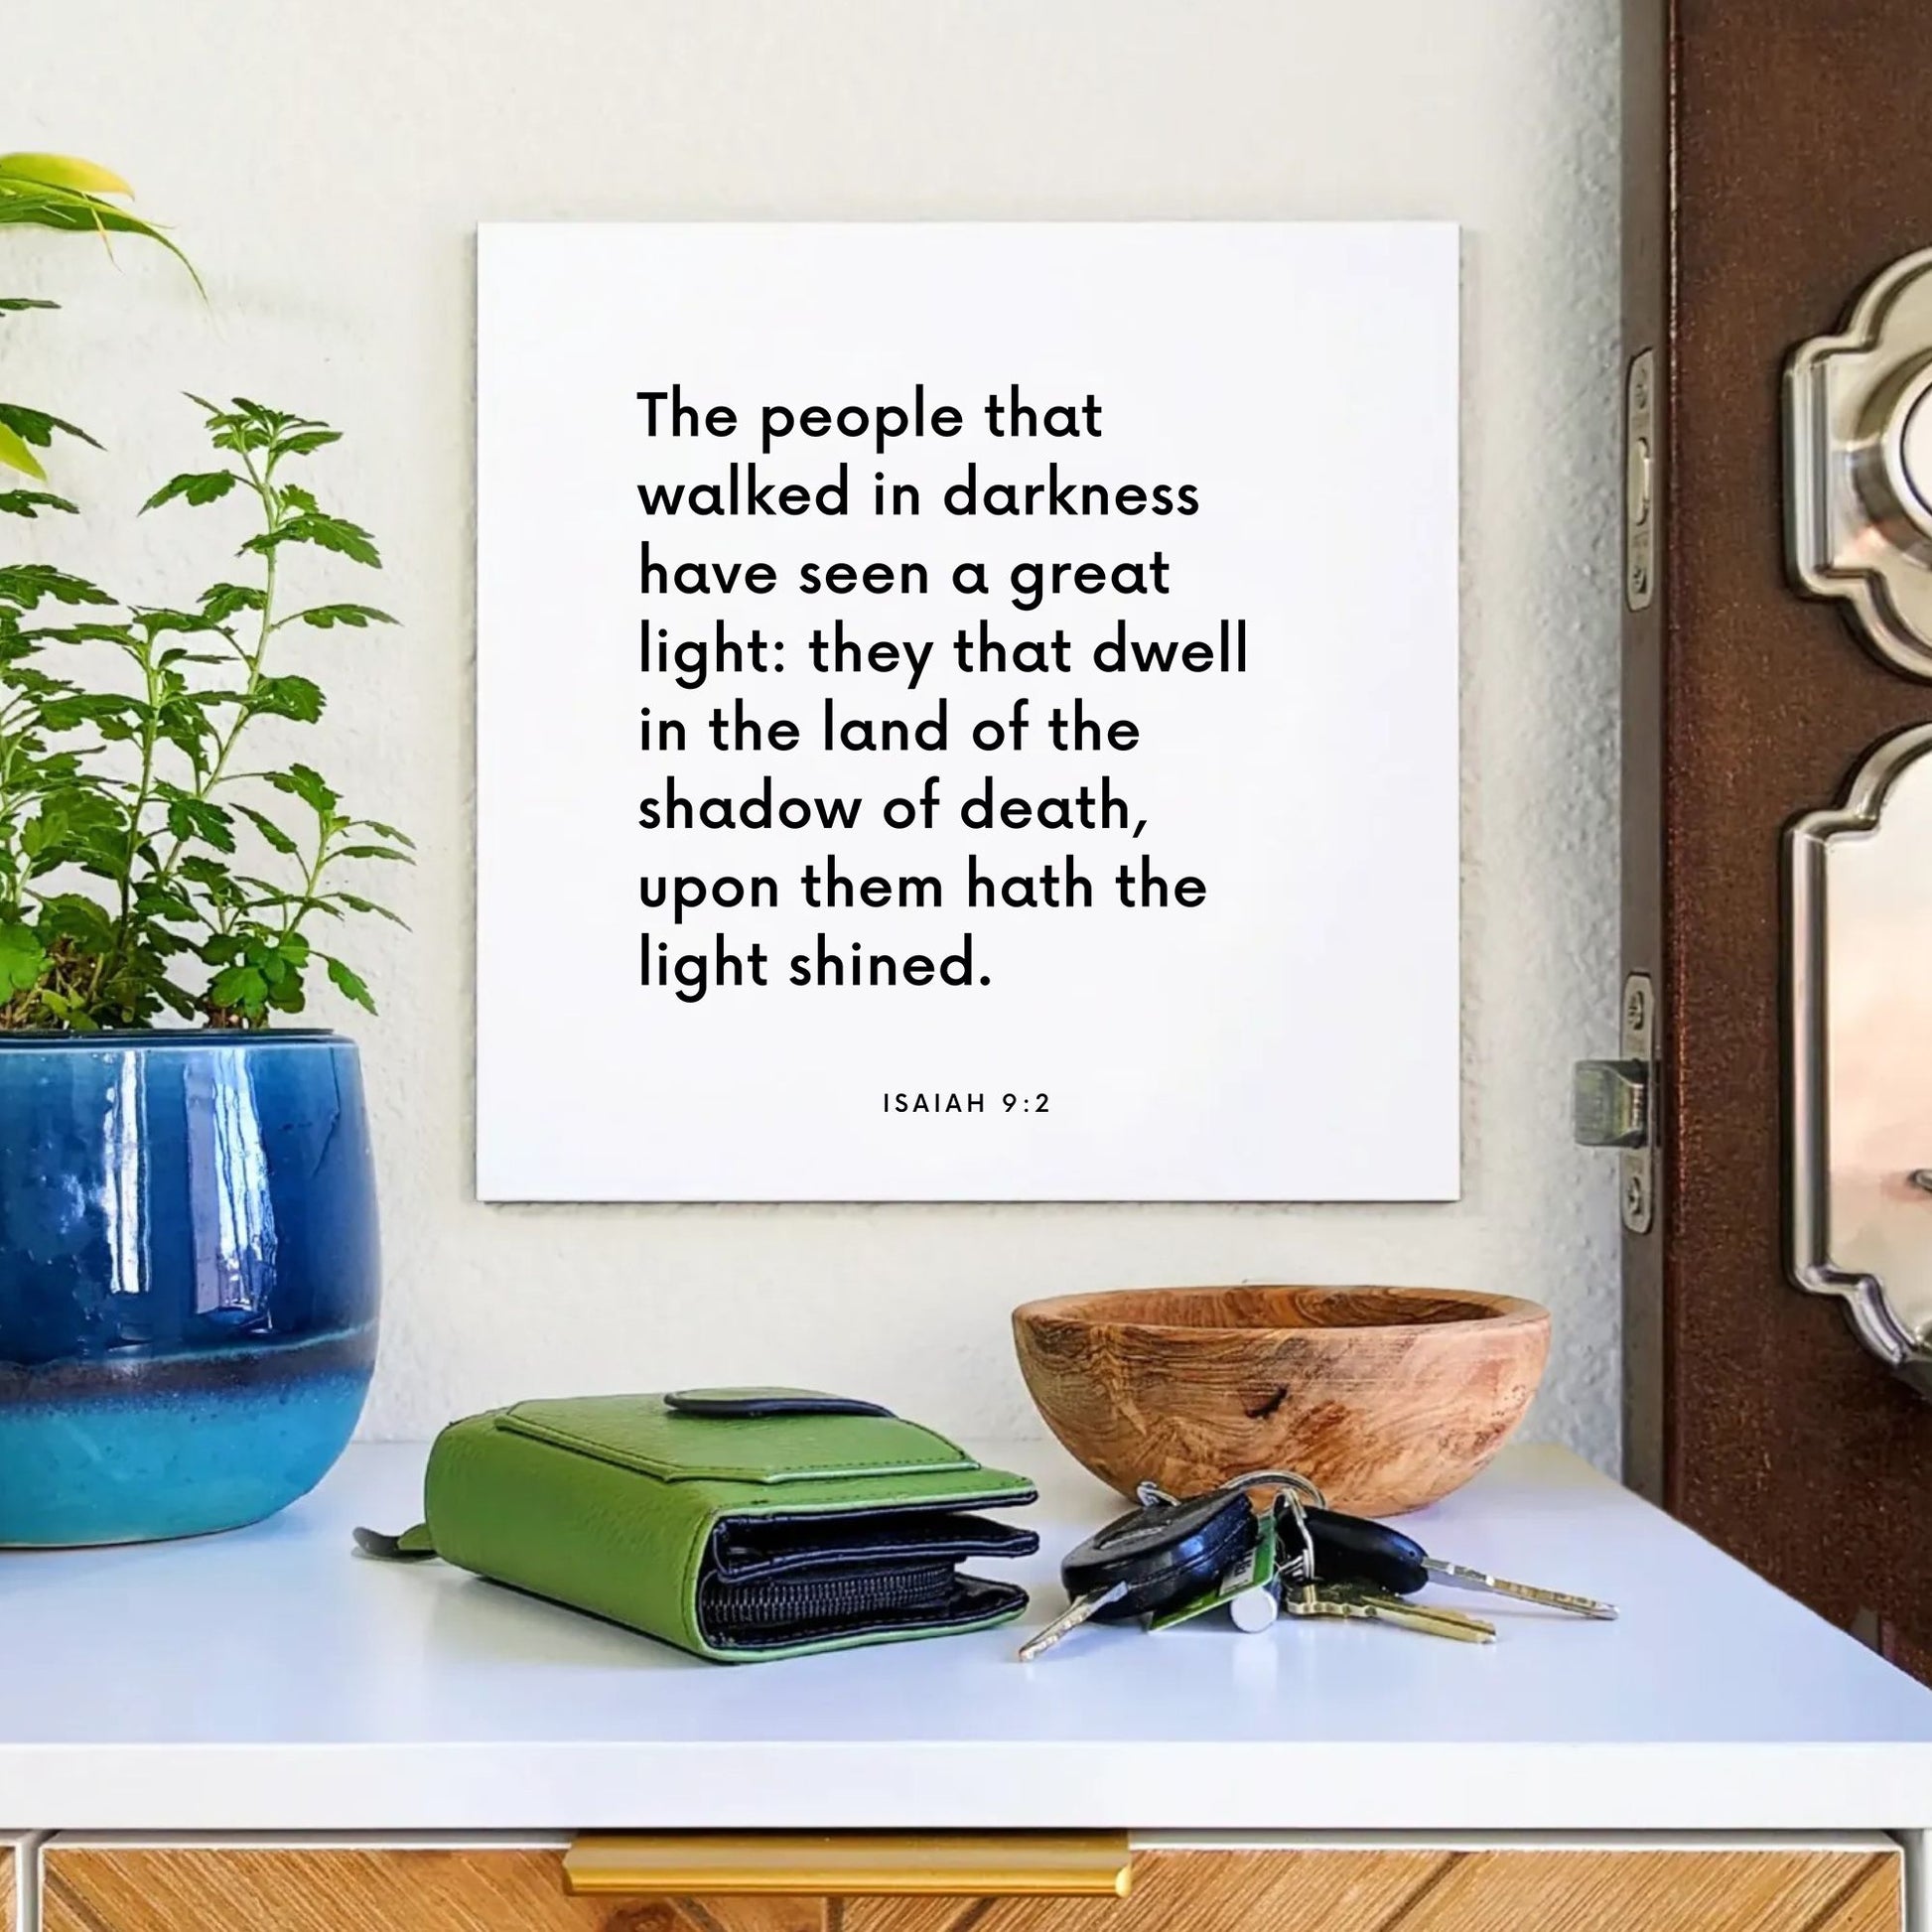 Entryway mouting of the scripture tile for Isaiah 9:2 - "The people that walked in darkness have seen a great light"